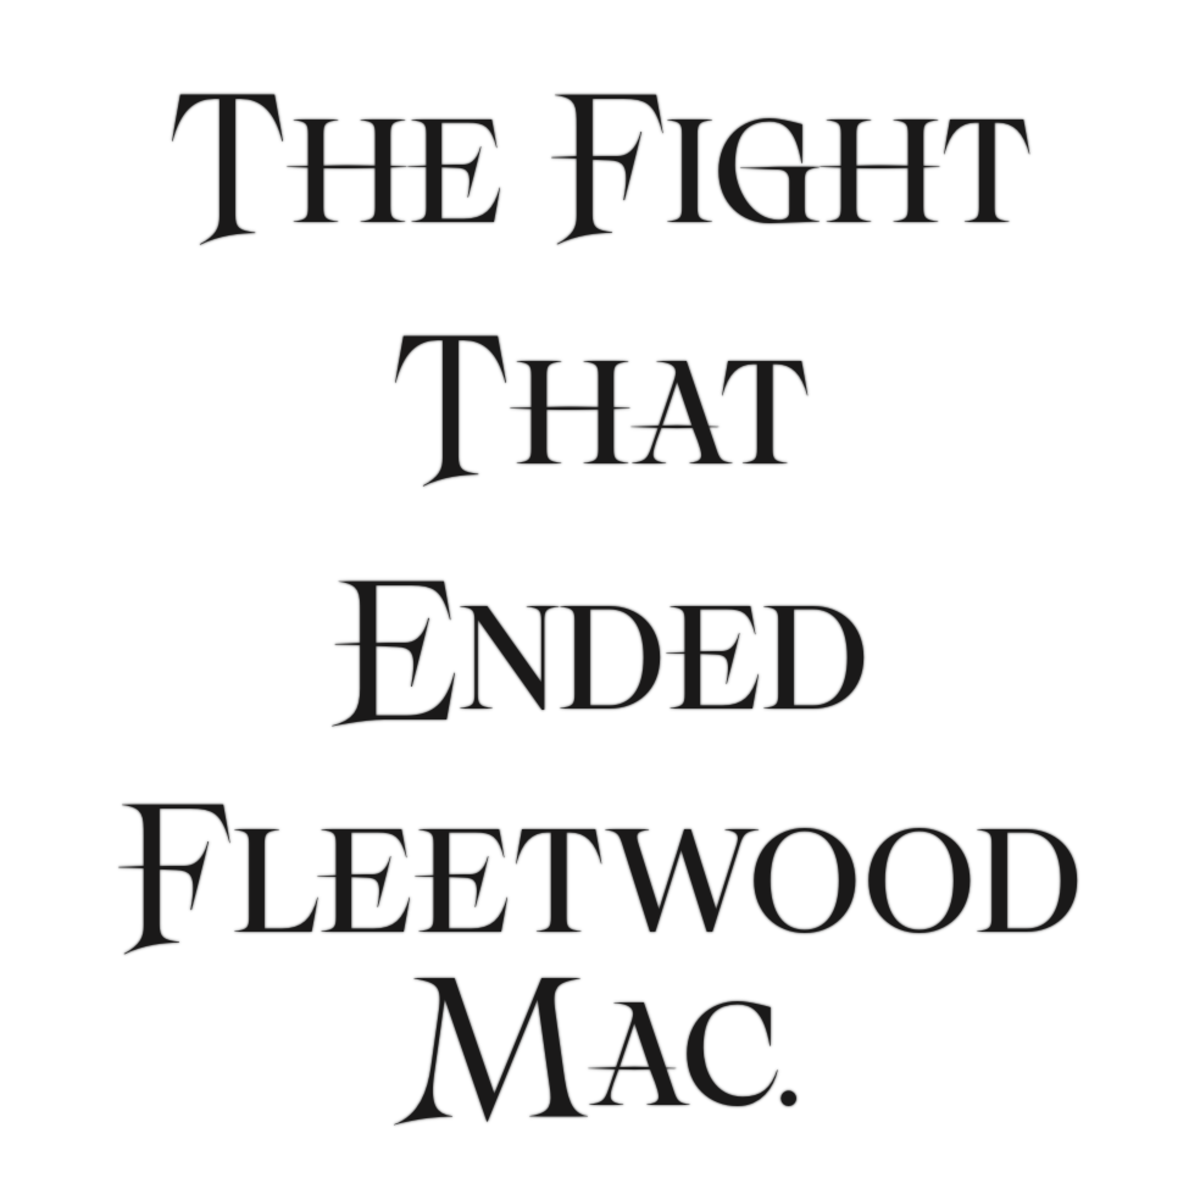 The Fight That Ended Fleetwood Mac.